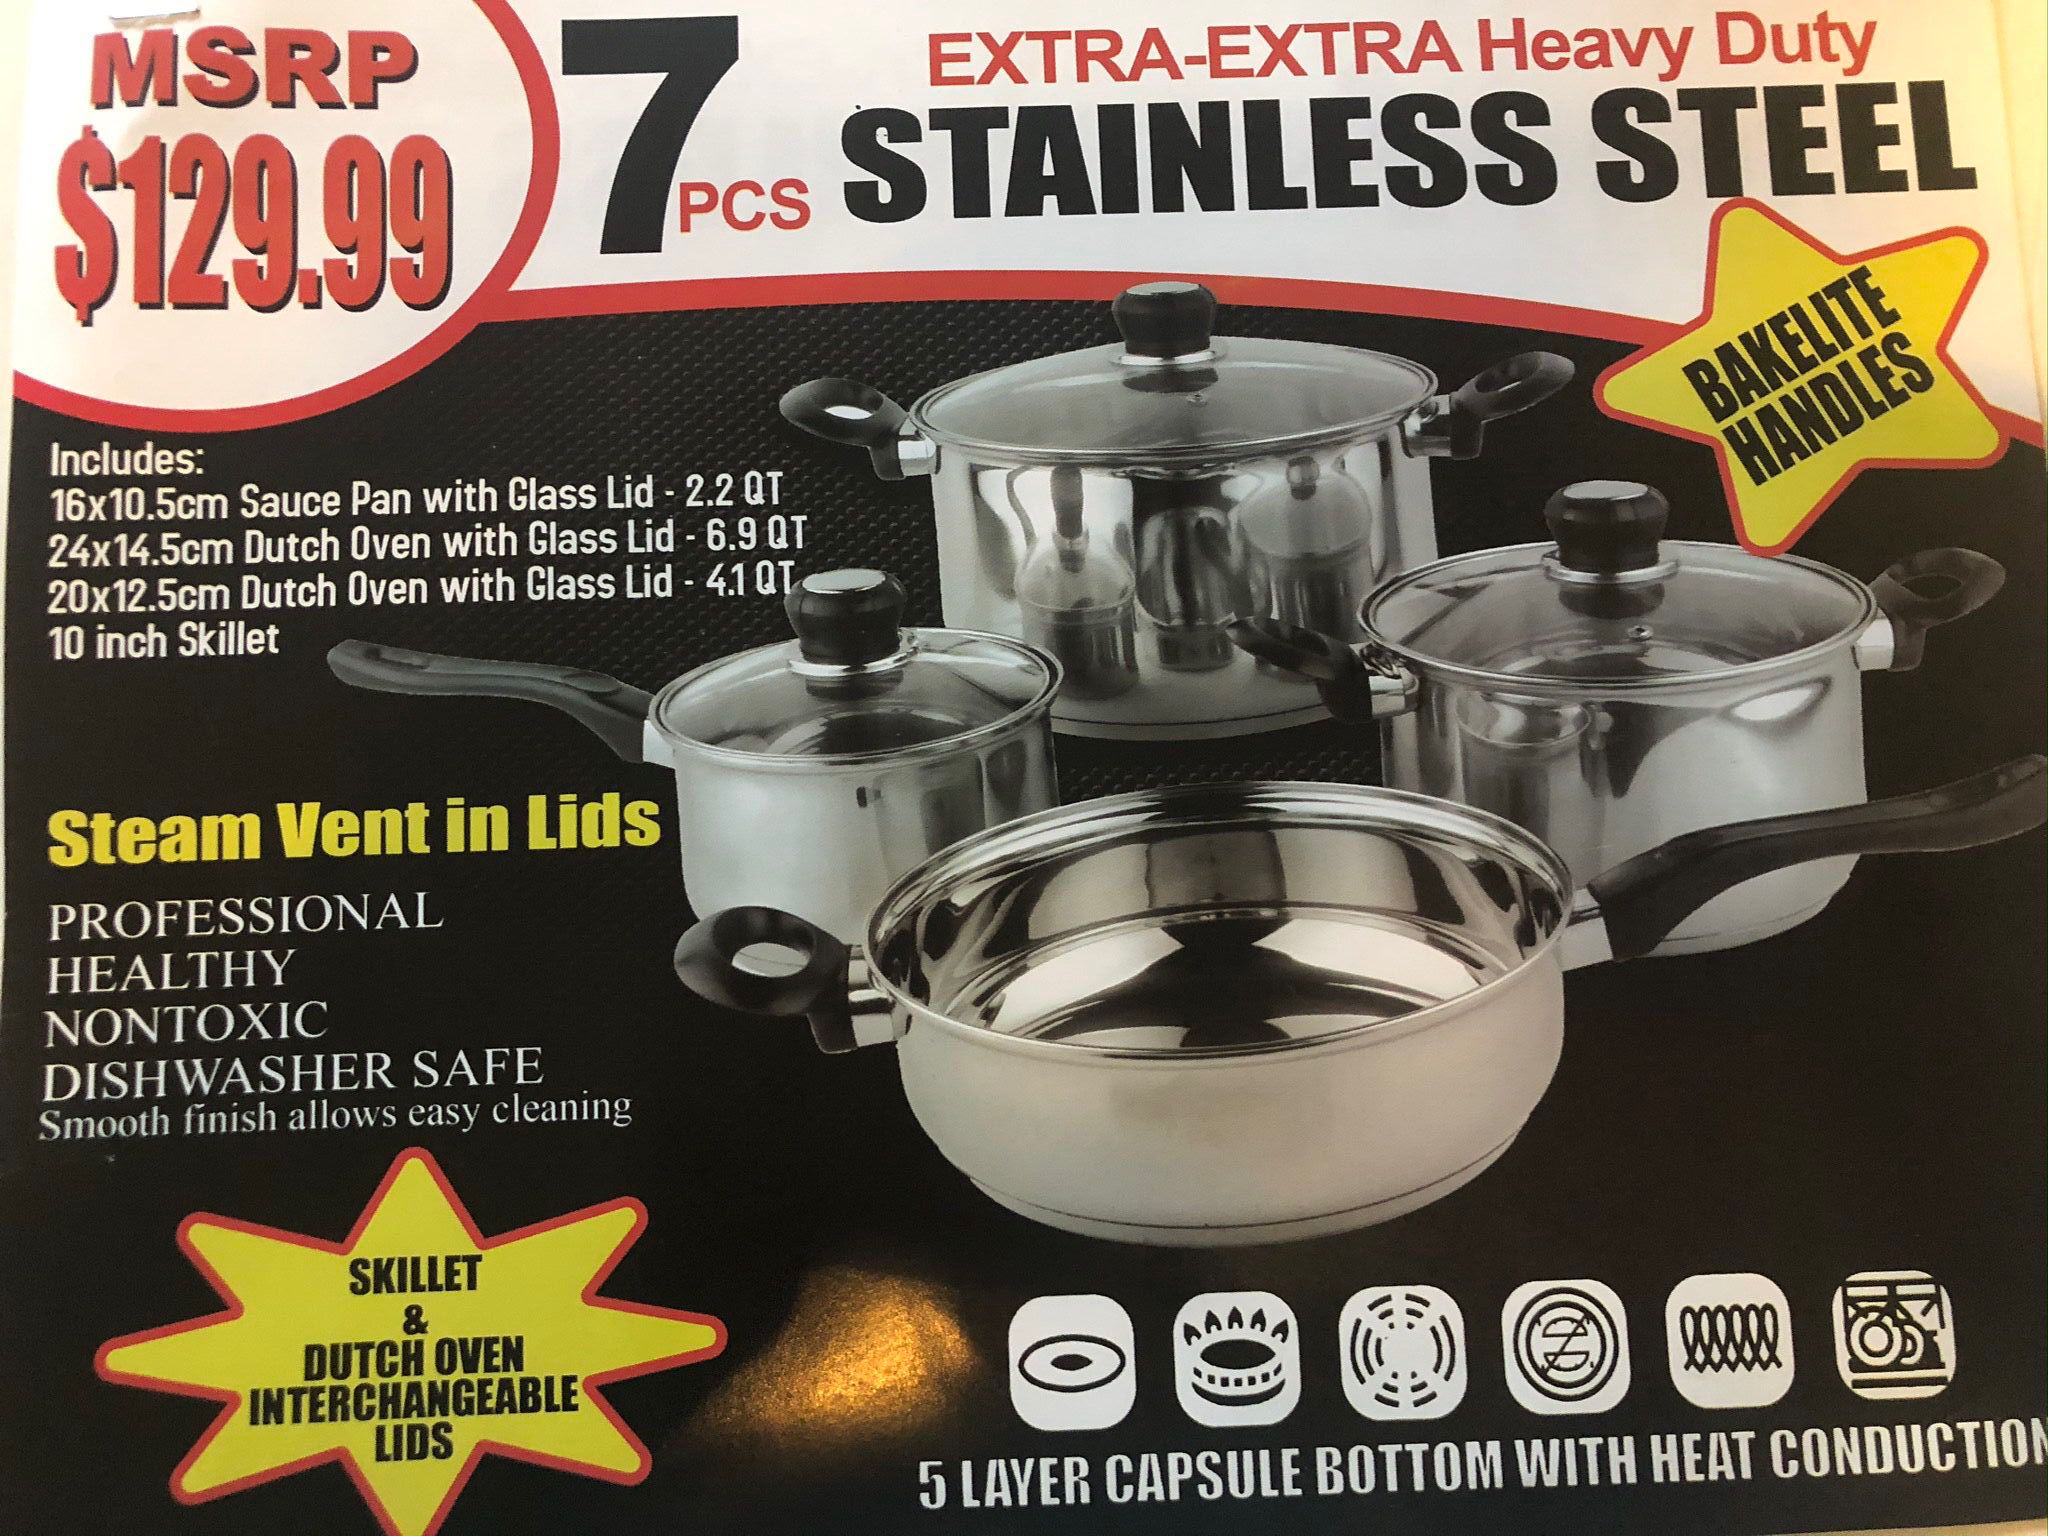 7pc Extra Heavy Stainless Steal Cookweare